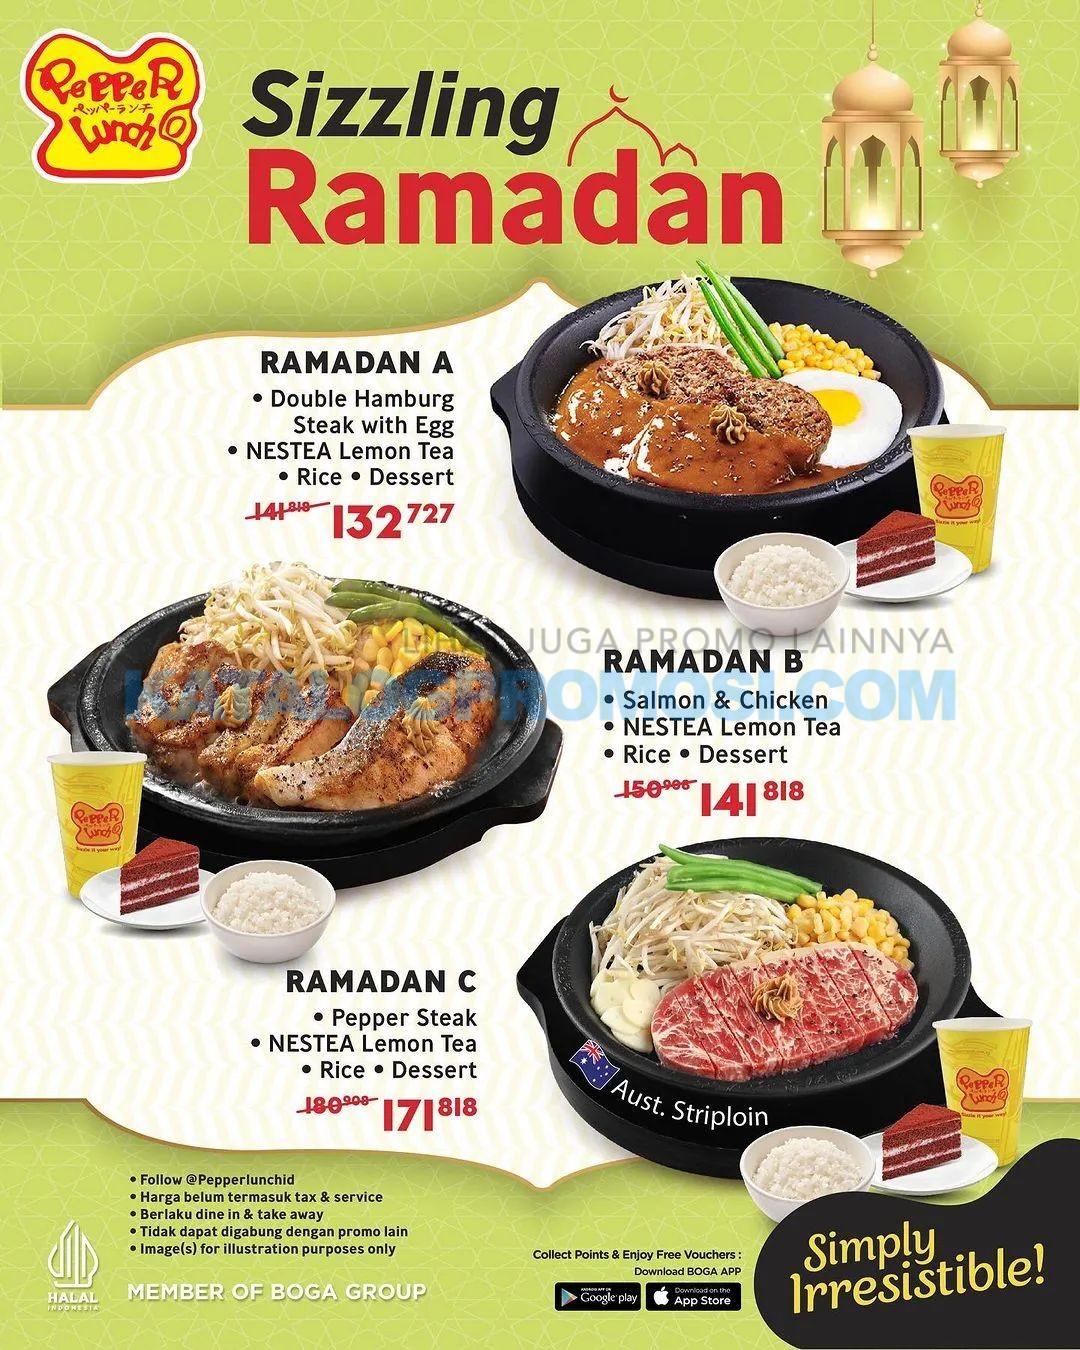 Promo PEPPER LUNCH Pakes Spesial Sizzling Ramadan!